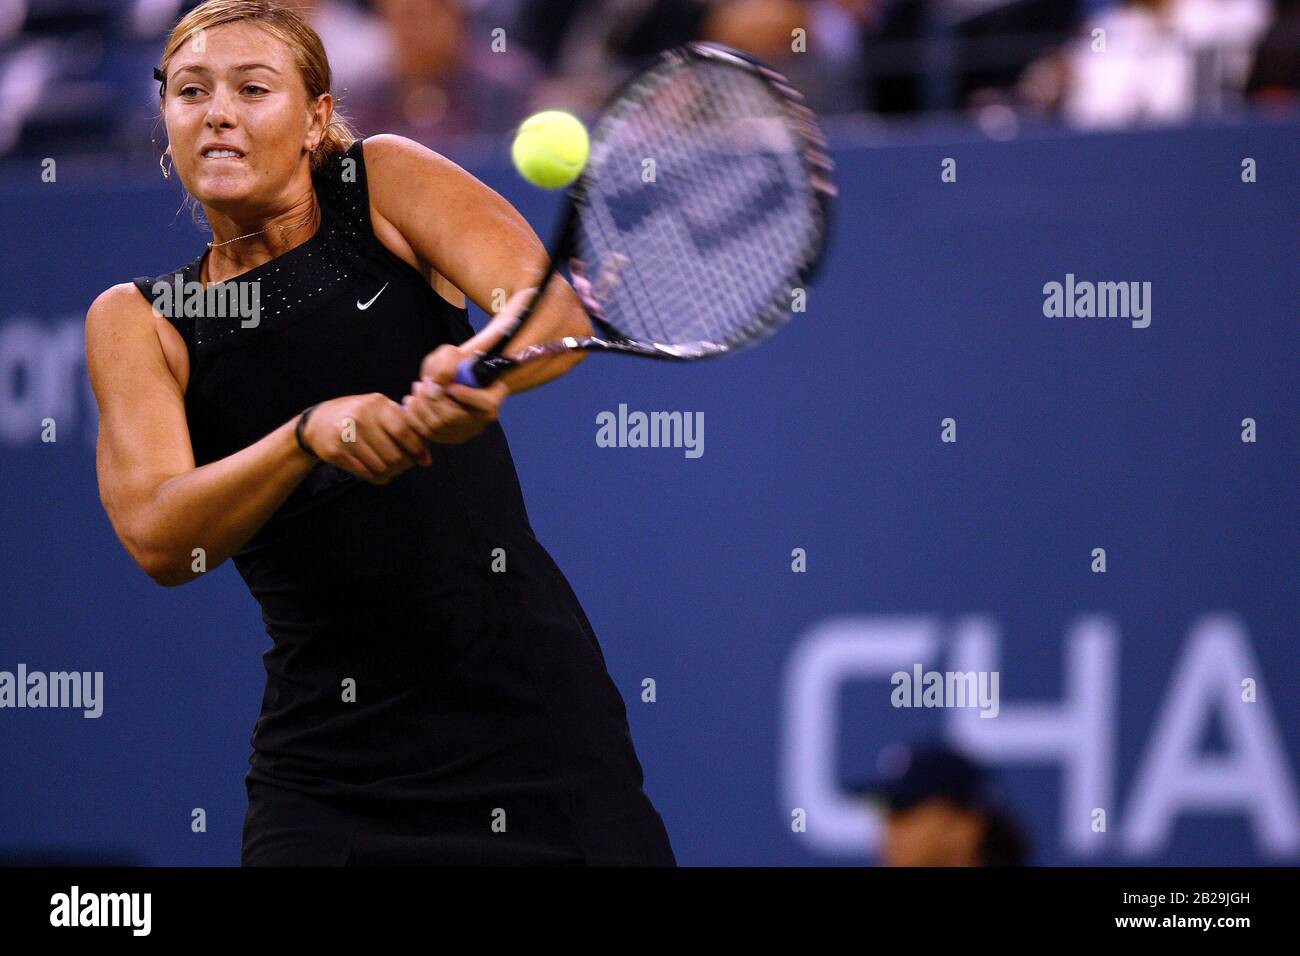 Maria Sharapova in action during her 2006 US Open victory at Flushing Meadows, New York. Sharapova, a five time grand slam champion, and one of the highest earning female athletes, announced her retirement from competitive tennis  this week. Stock Photo